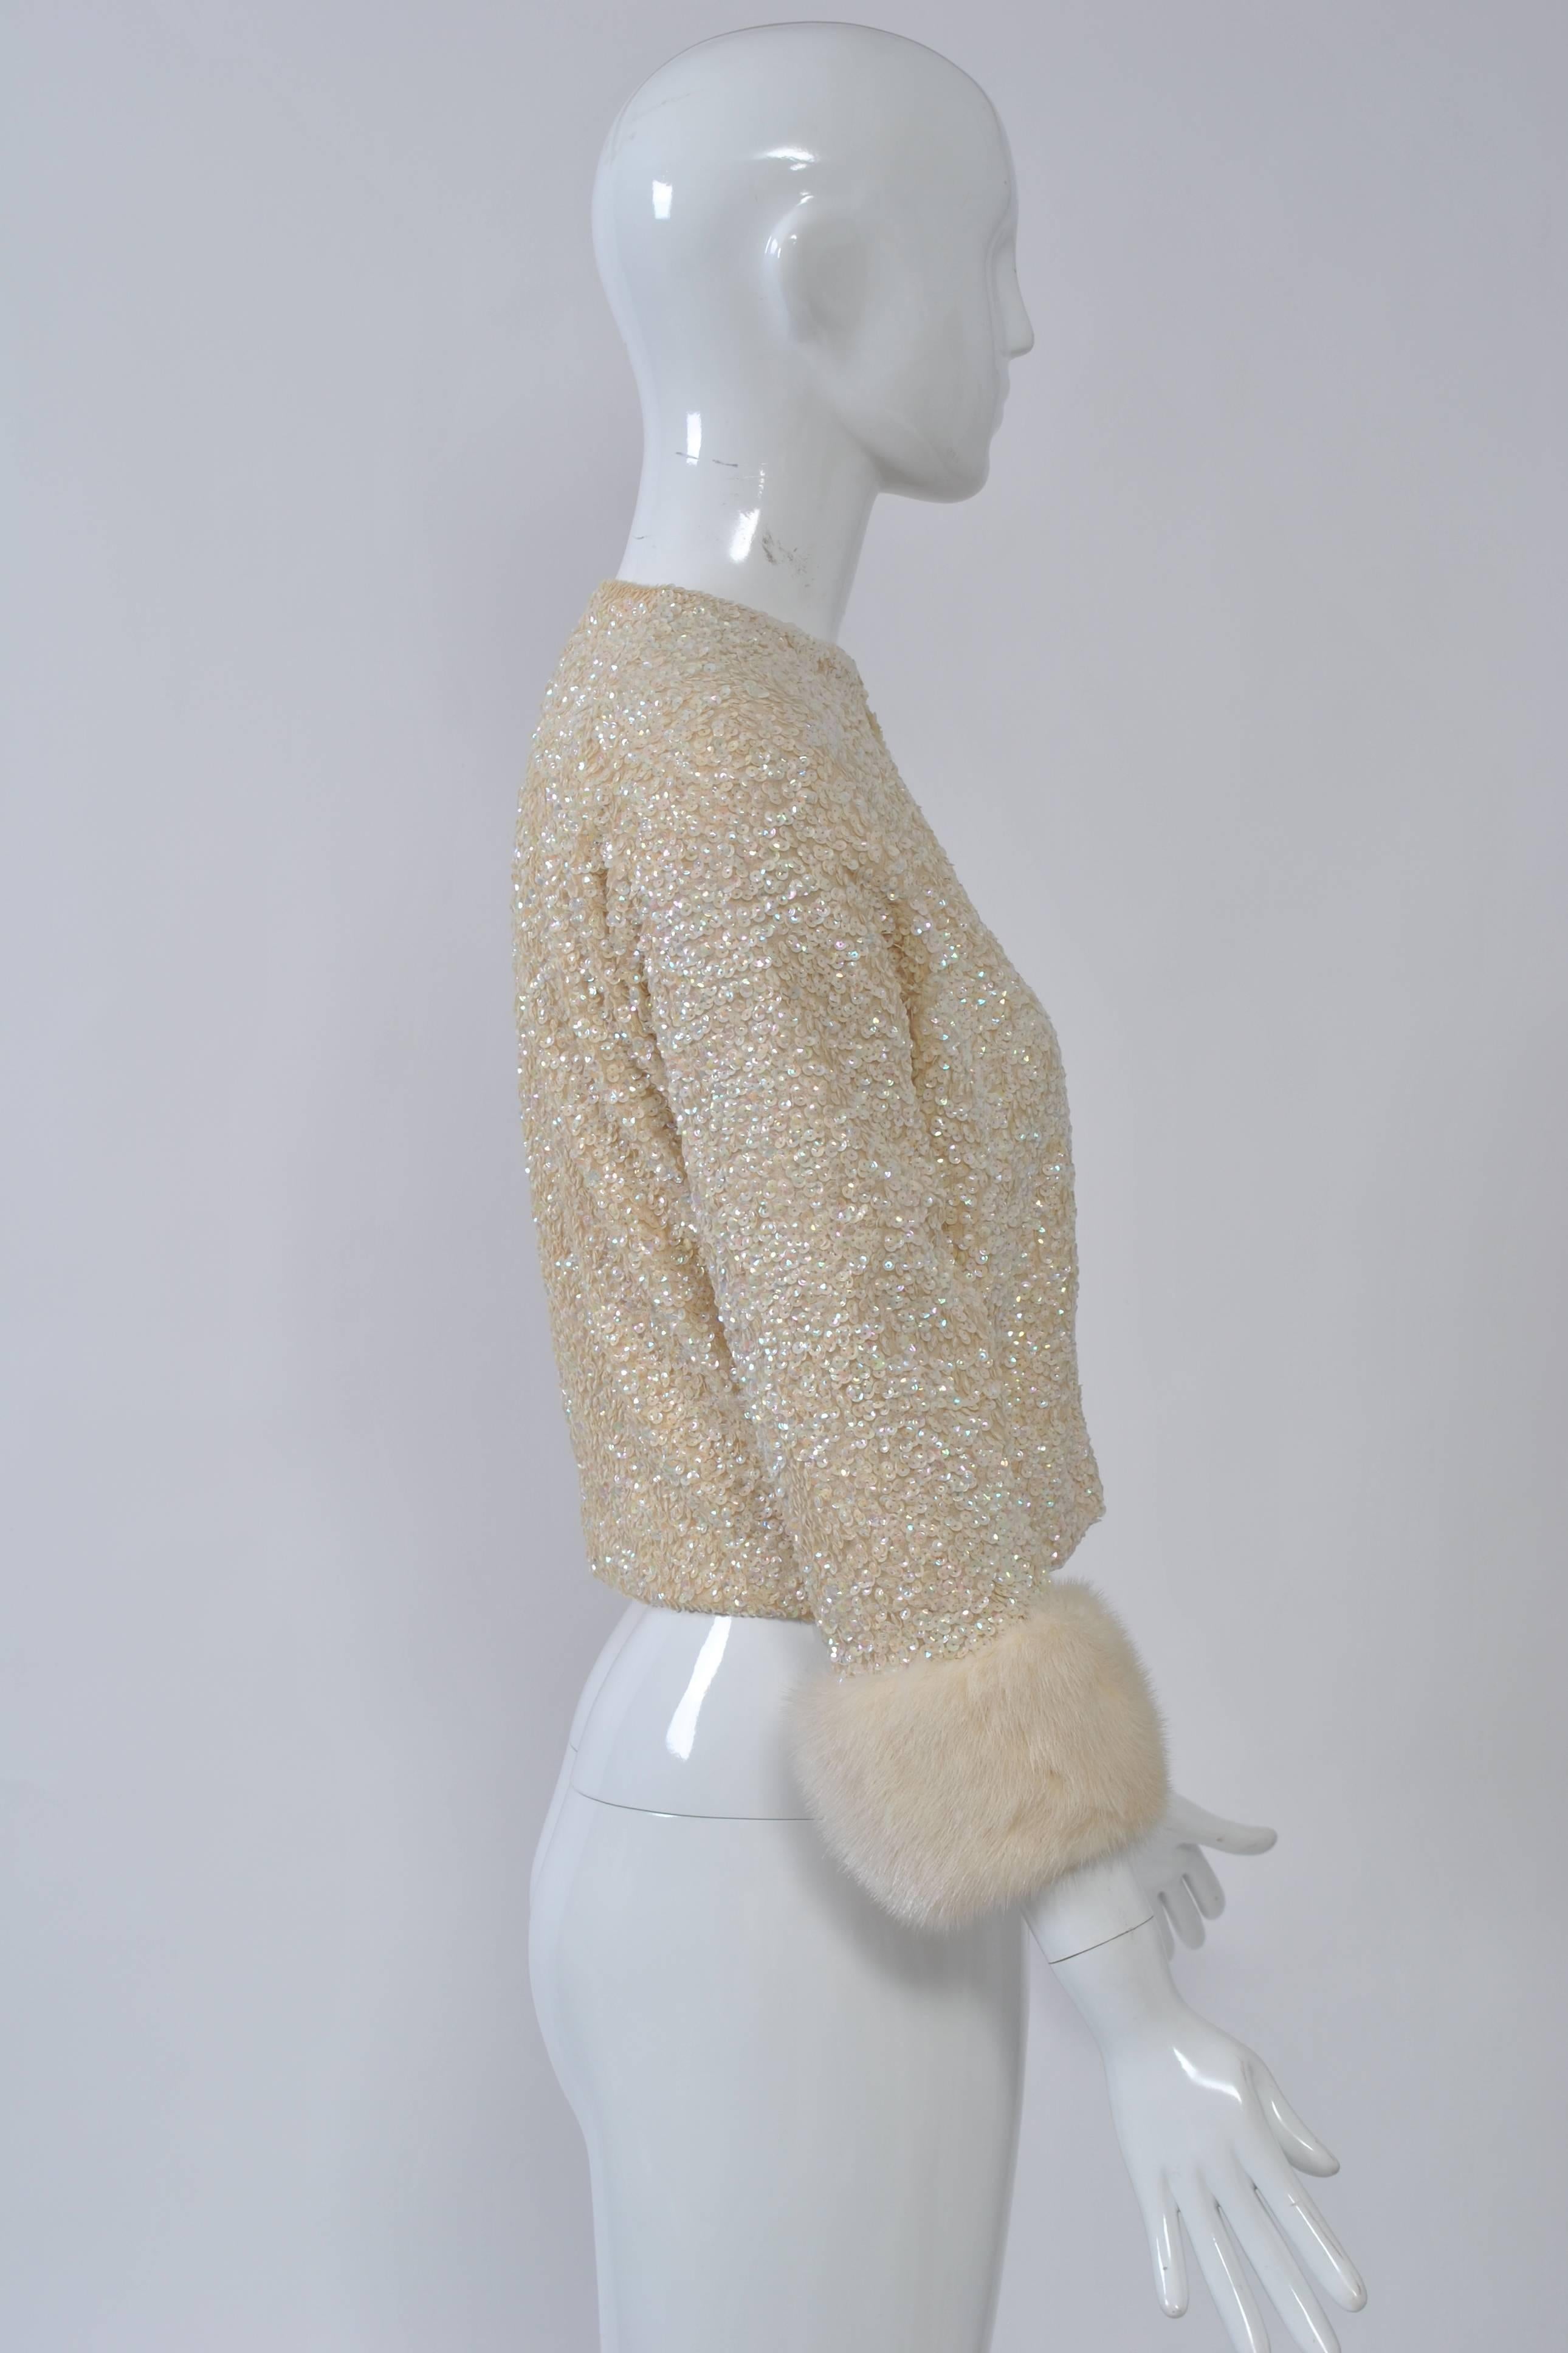 Off-white wool cardigan covered with iridescent sequins and with three-quarter sleeves trimmed in white mink. Waist-length, collarless with hook-and-eye closures down front. Lined in silk.